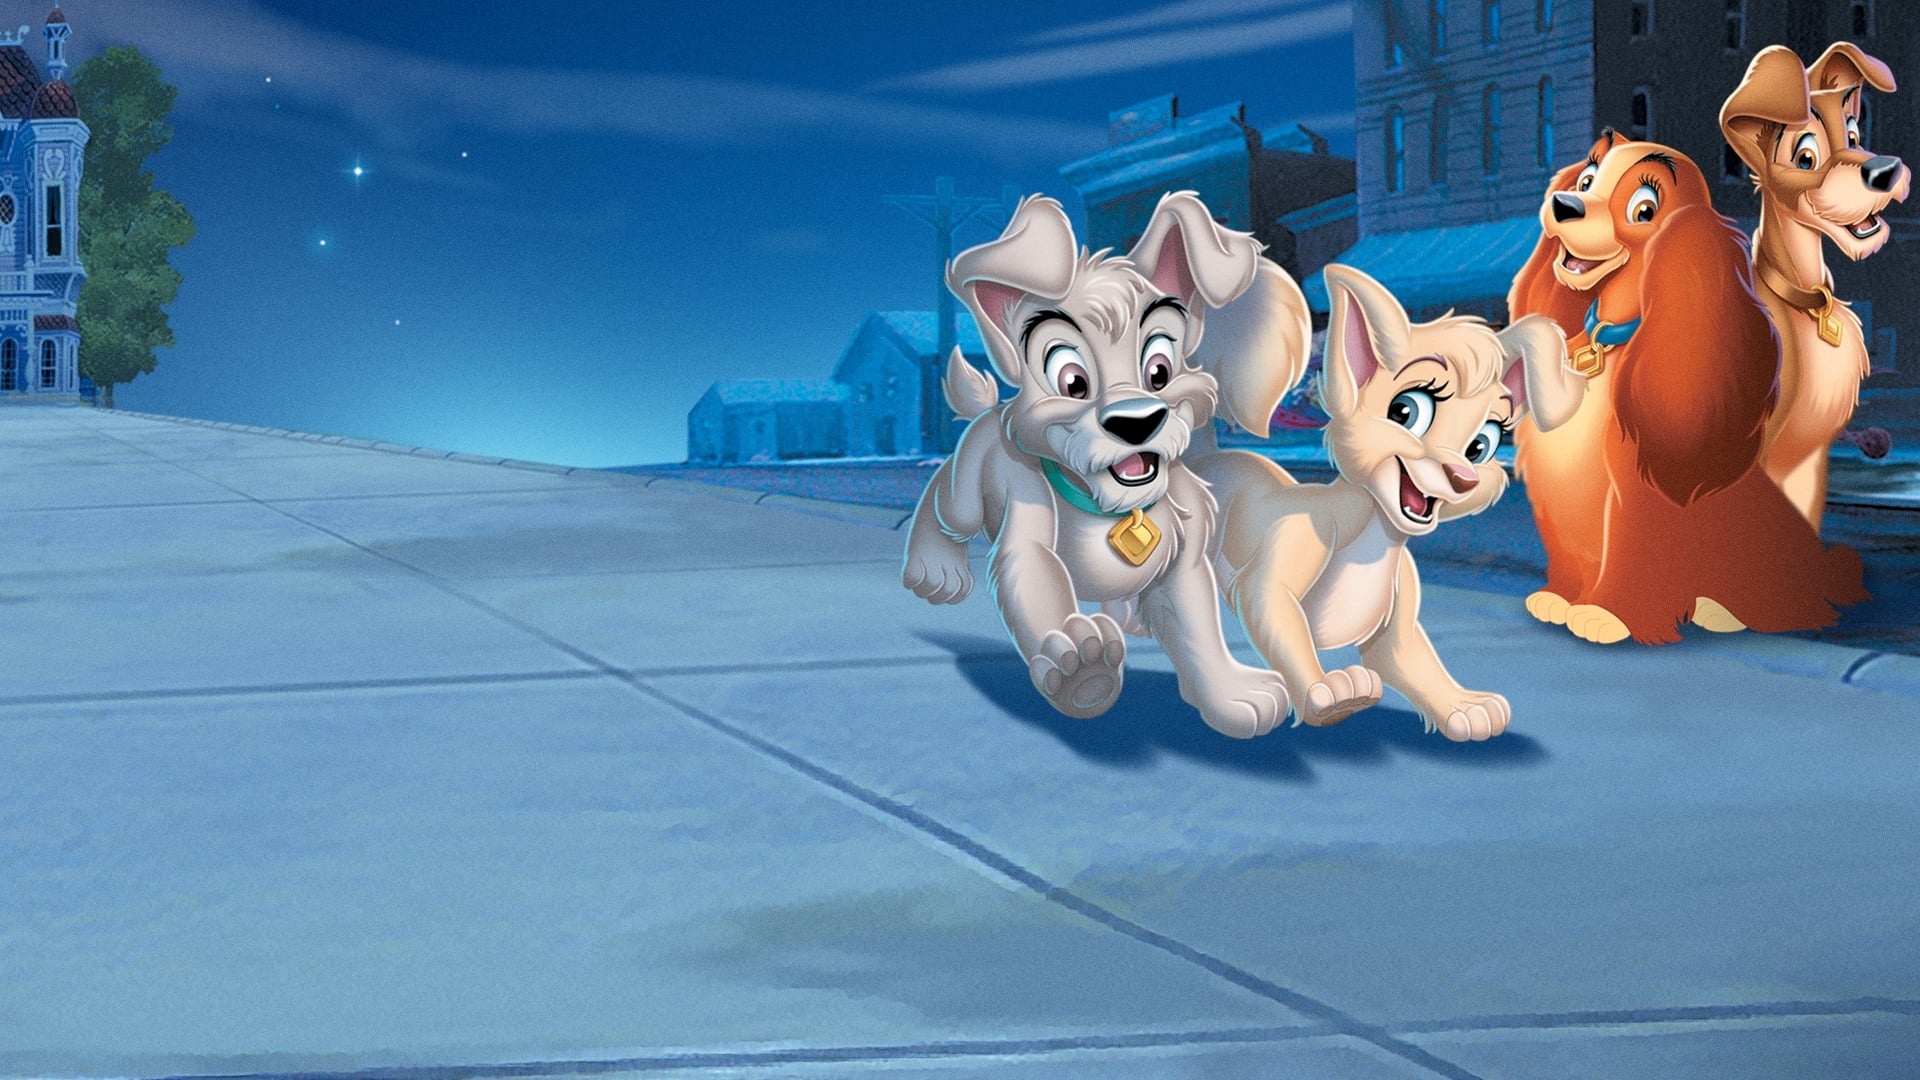 Lady and the Tramp II, Scamps adventure, Movie backdrop, The movie database, 1920x1080 Full HD Desktop